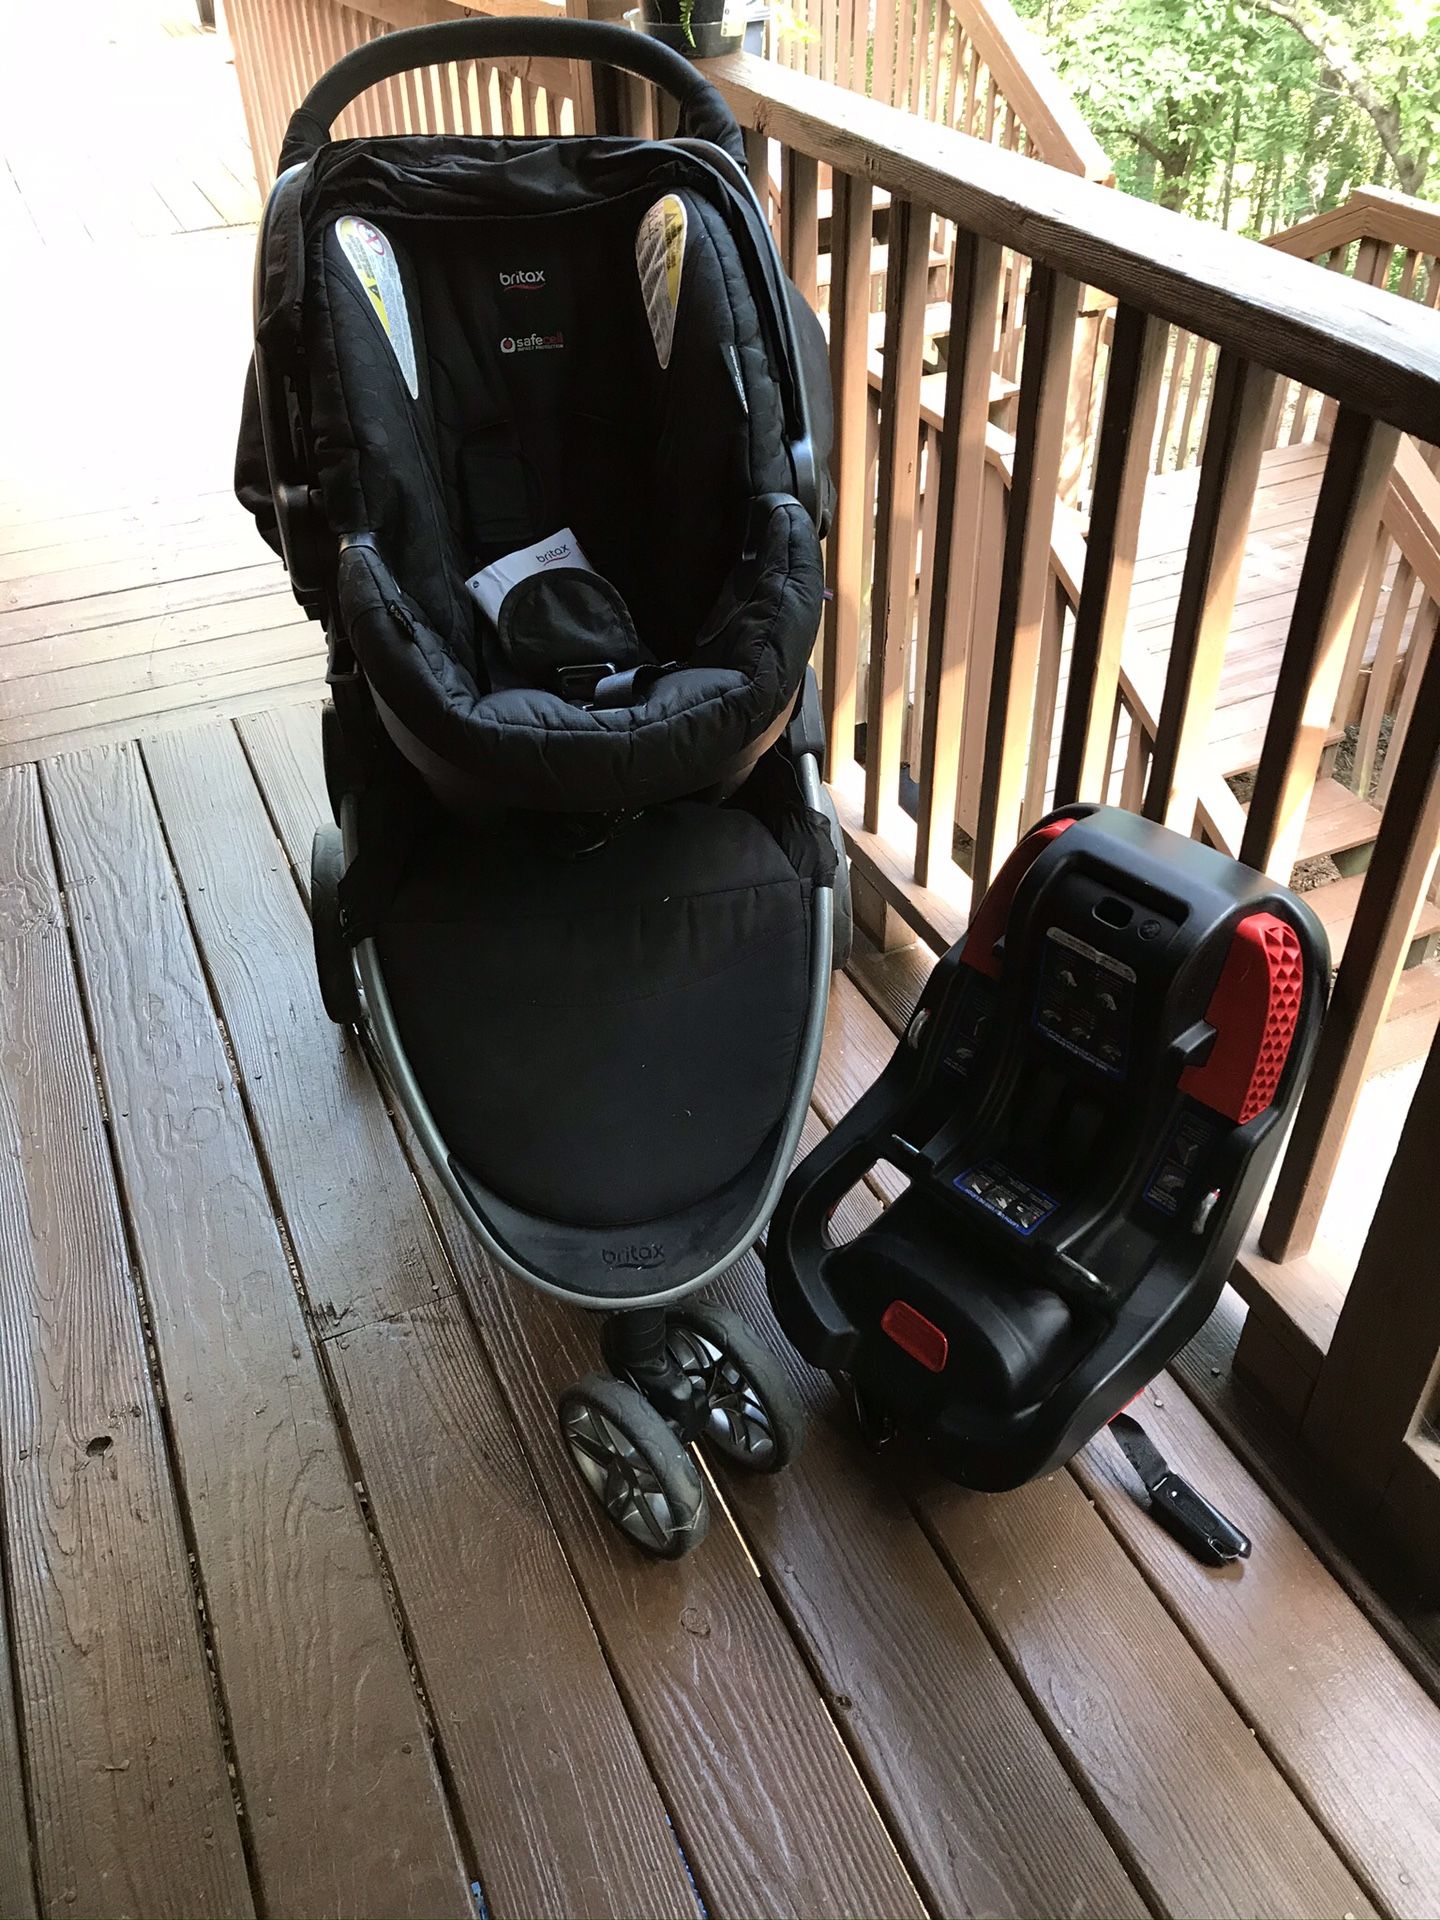 Britax infant seat, base, and stroller